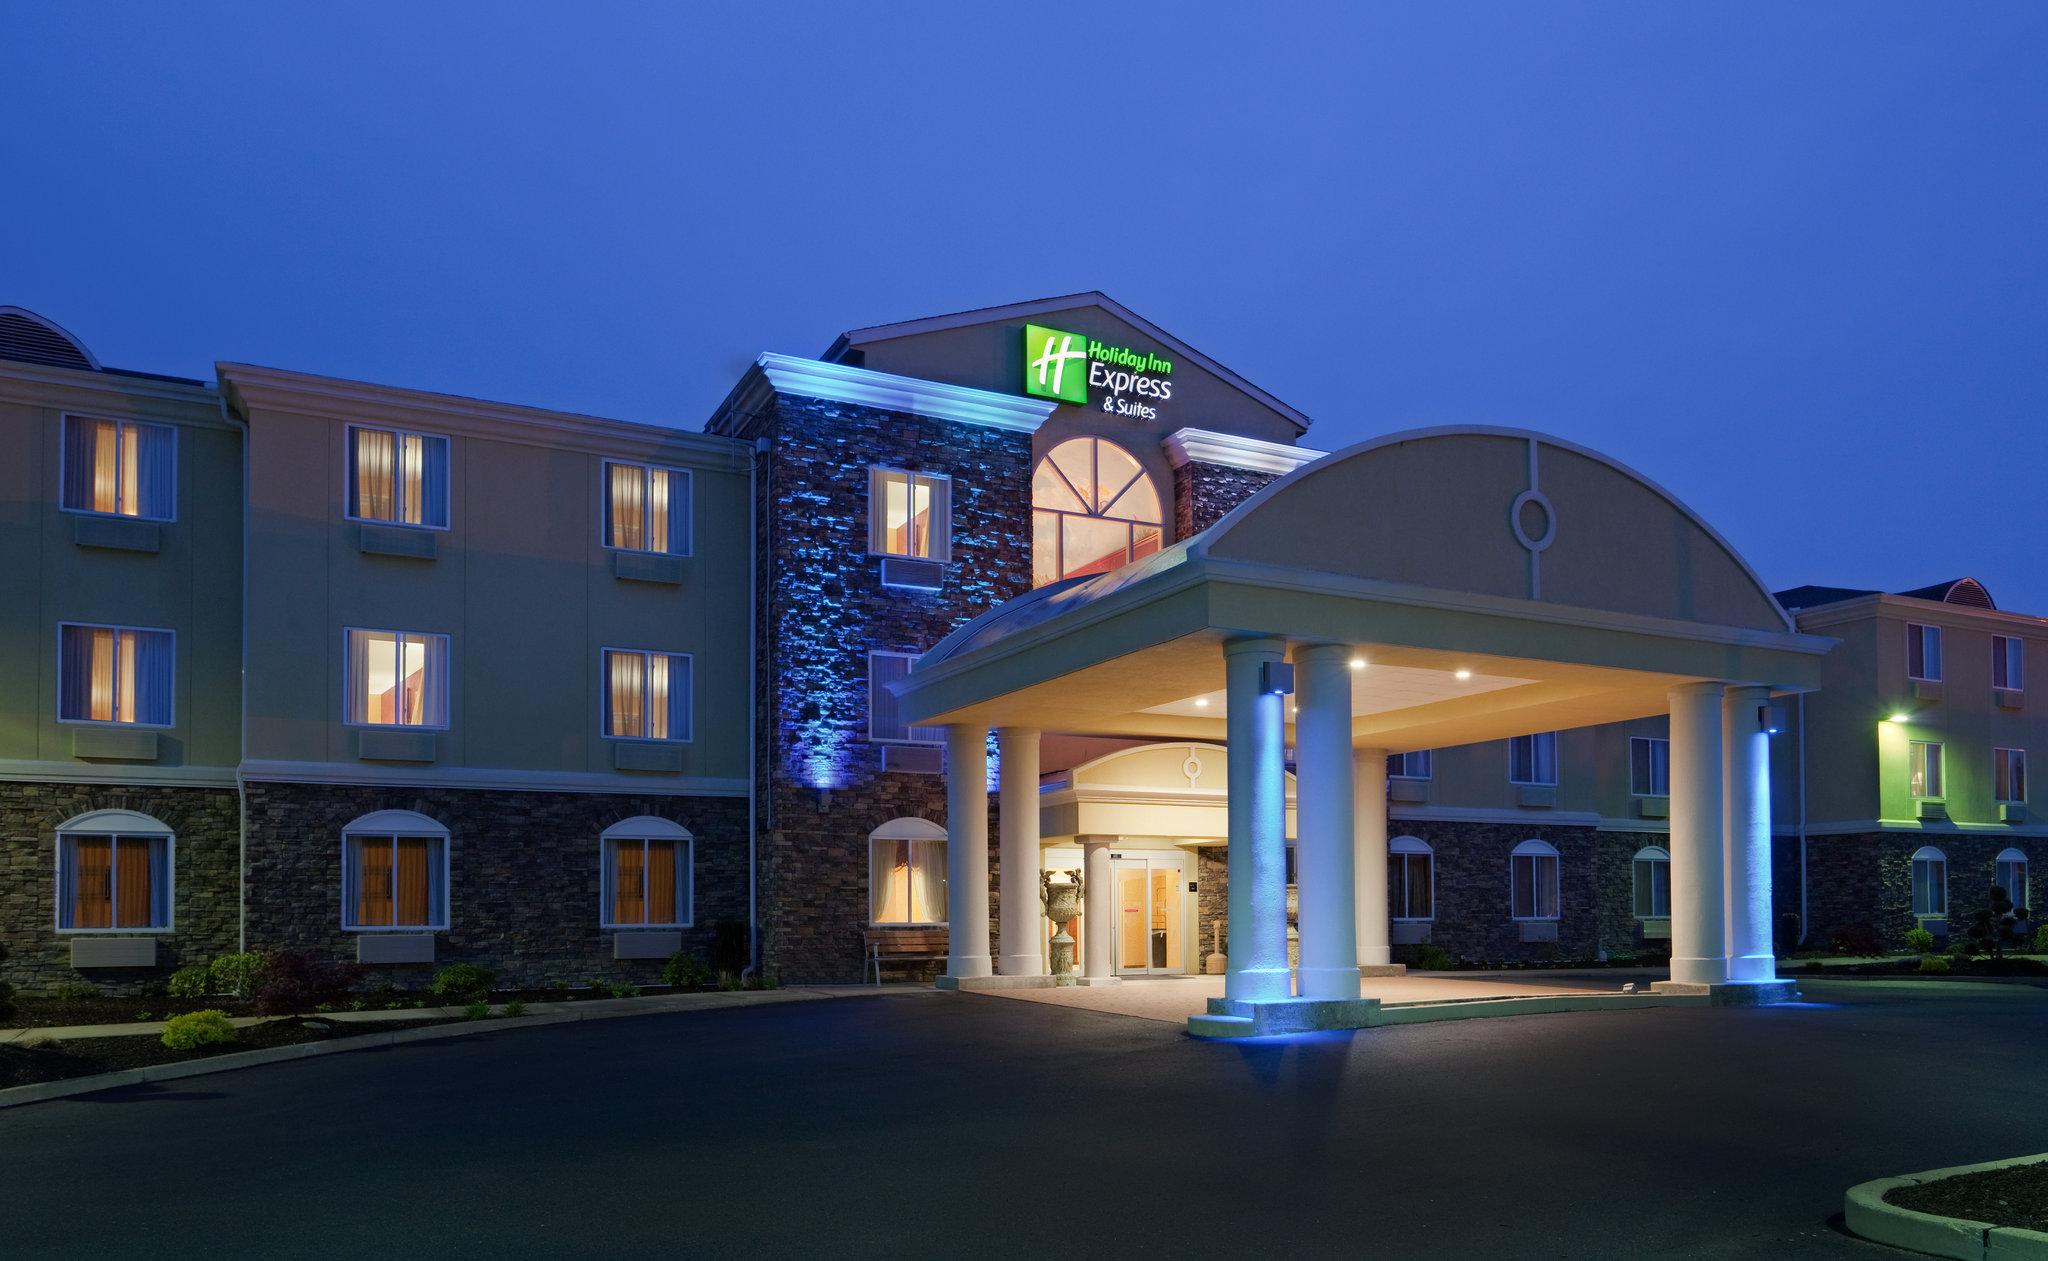 Holiday Inn Express Hotel & Suites Swansea in Swansea, MA